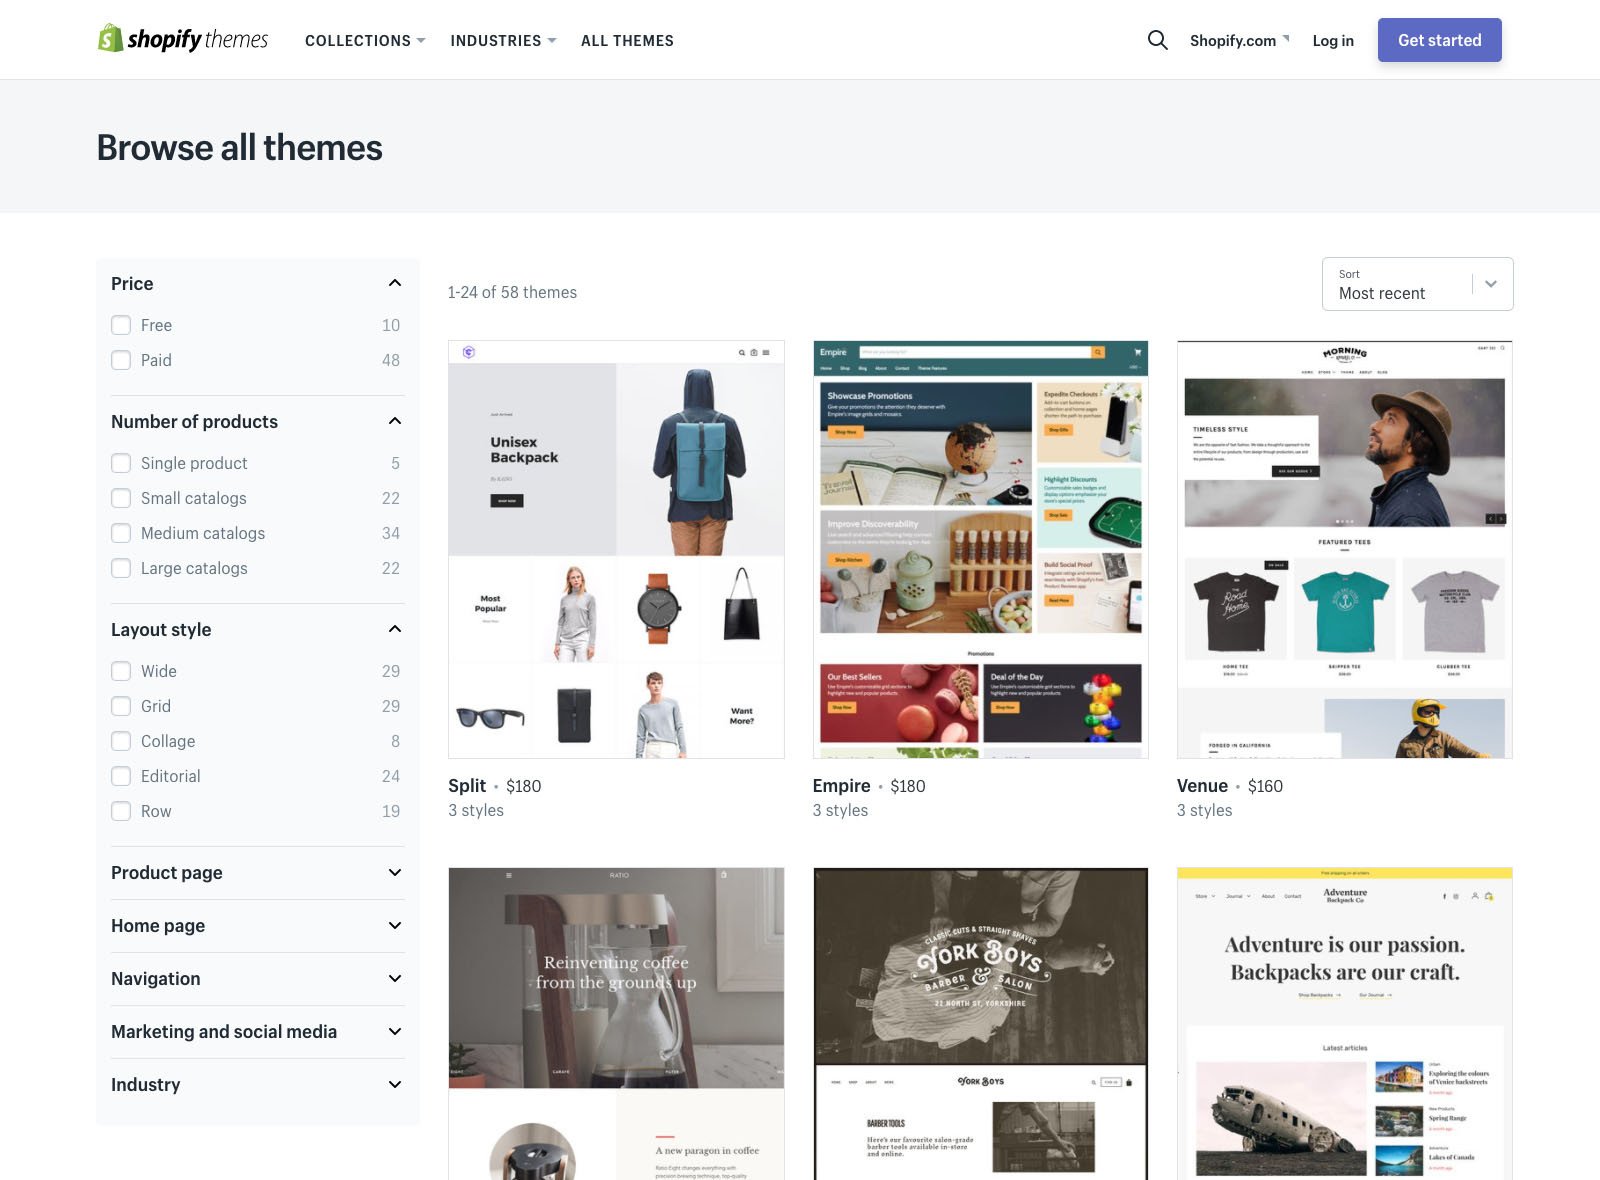 The theme store provided by Shopify